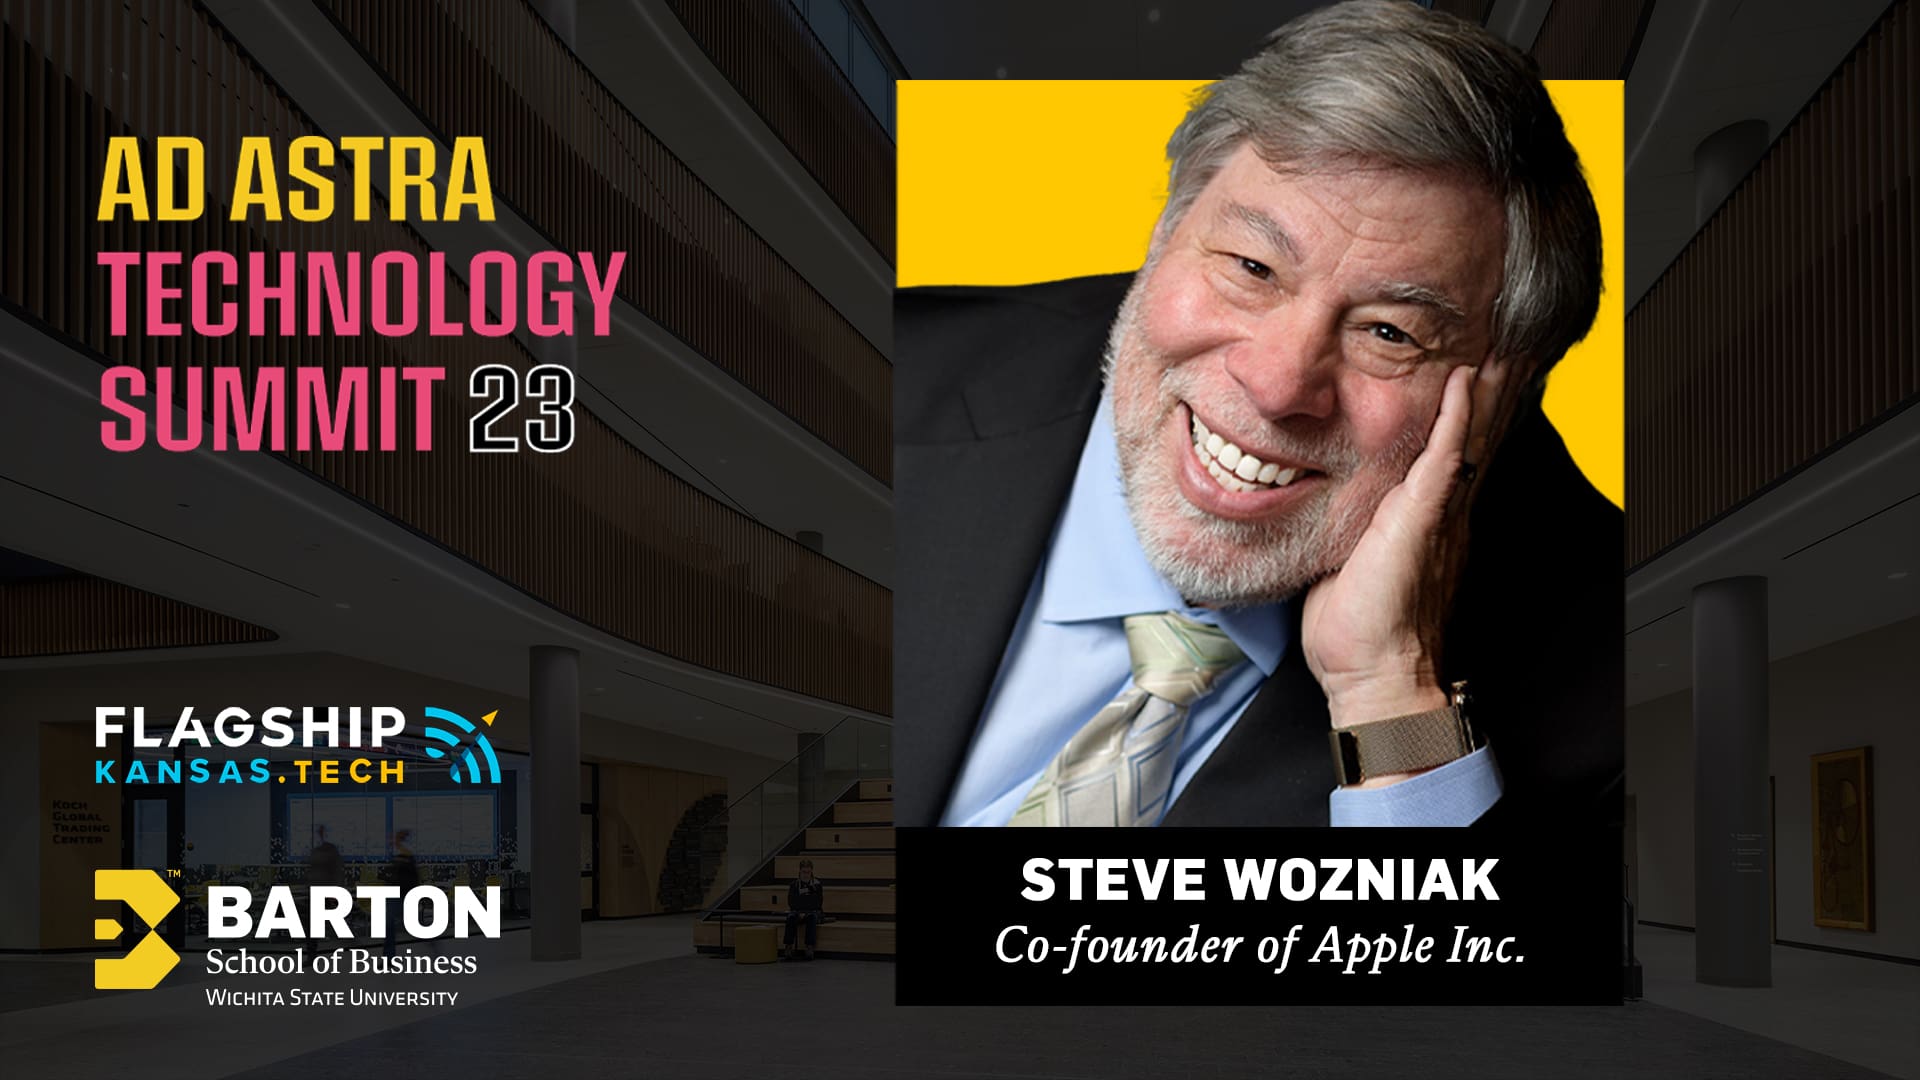 The W. Frank Barton School of Business at Wichita State University is excited to be the FlagshipKansas.Tech event partner for their second Ad Astra Technology Summit featuring Steve Wozniak, co-founder of Apple Inc.